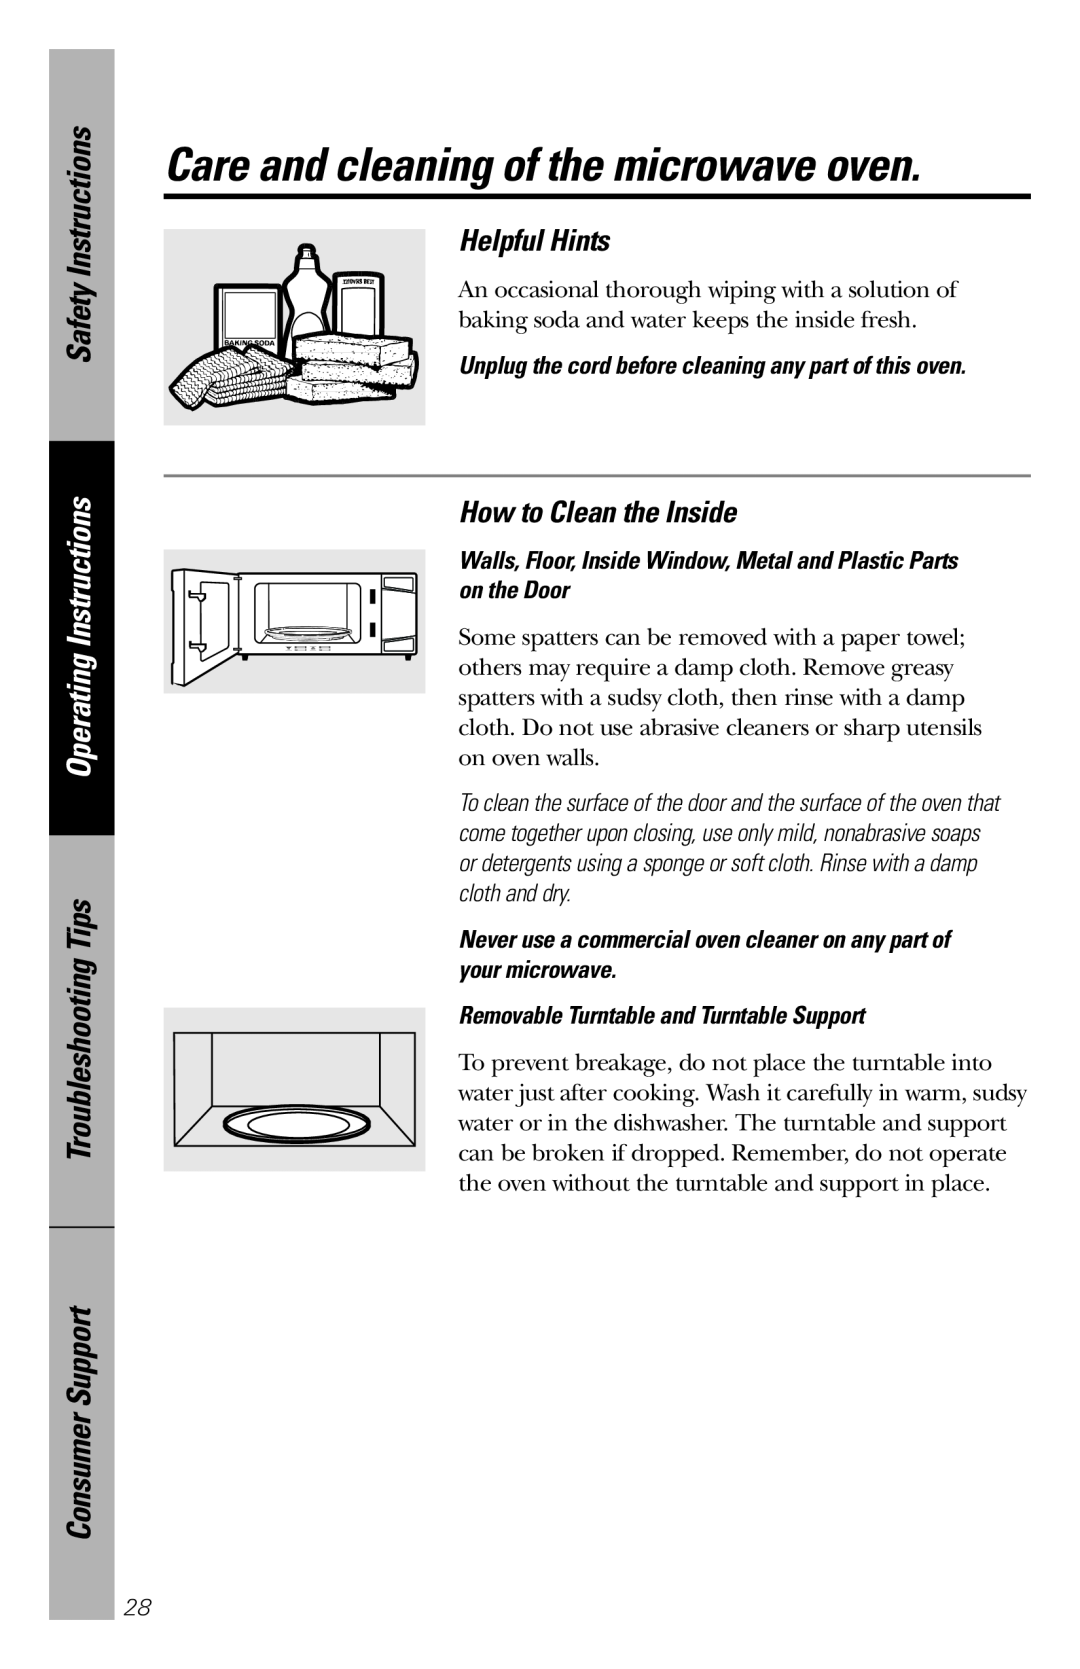 GE PEM31 owner manual Helpful Hints, How to Clean the Inside, Care and cleaning of the microwave oven, Safety Instructions 